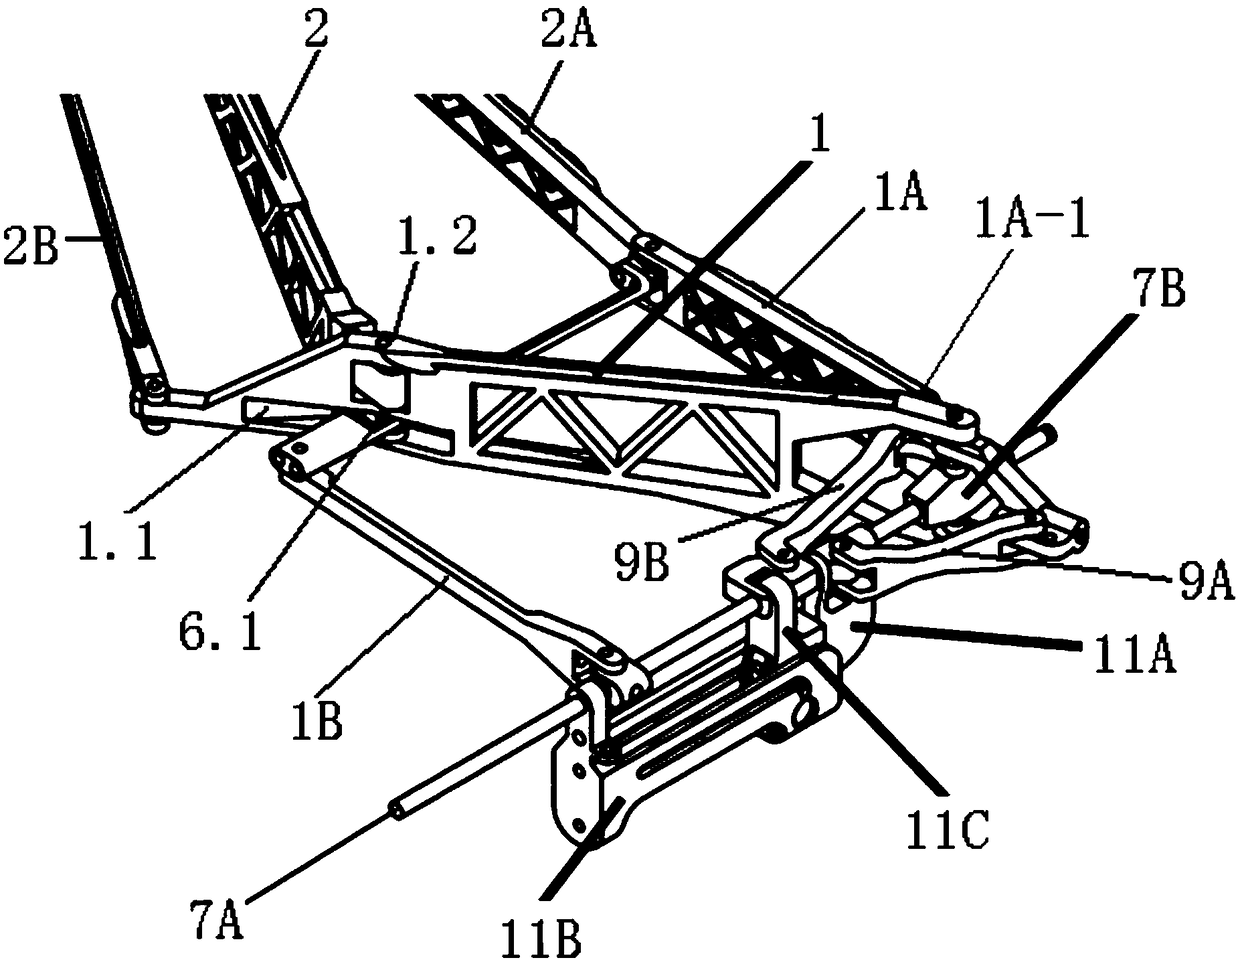 Folding wings of a flapping-wing aircraft that imitates folding wings of birds and bats